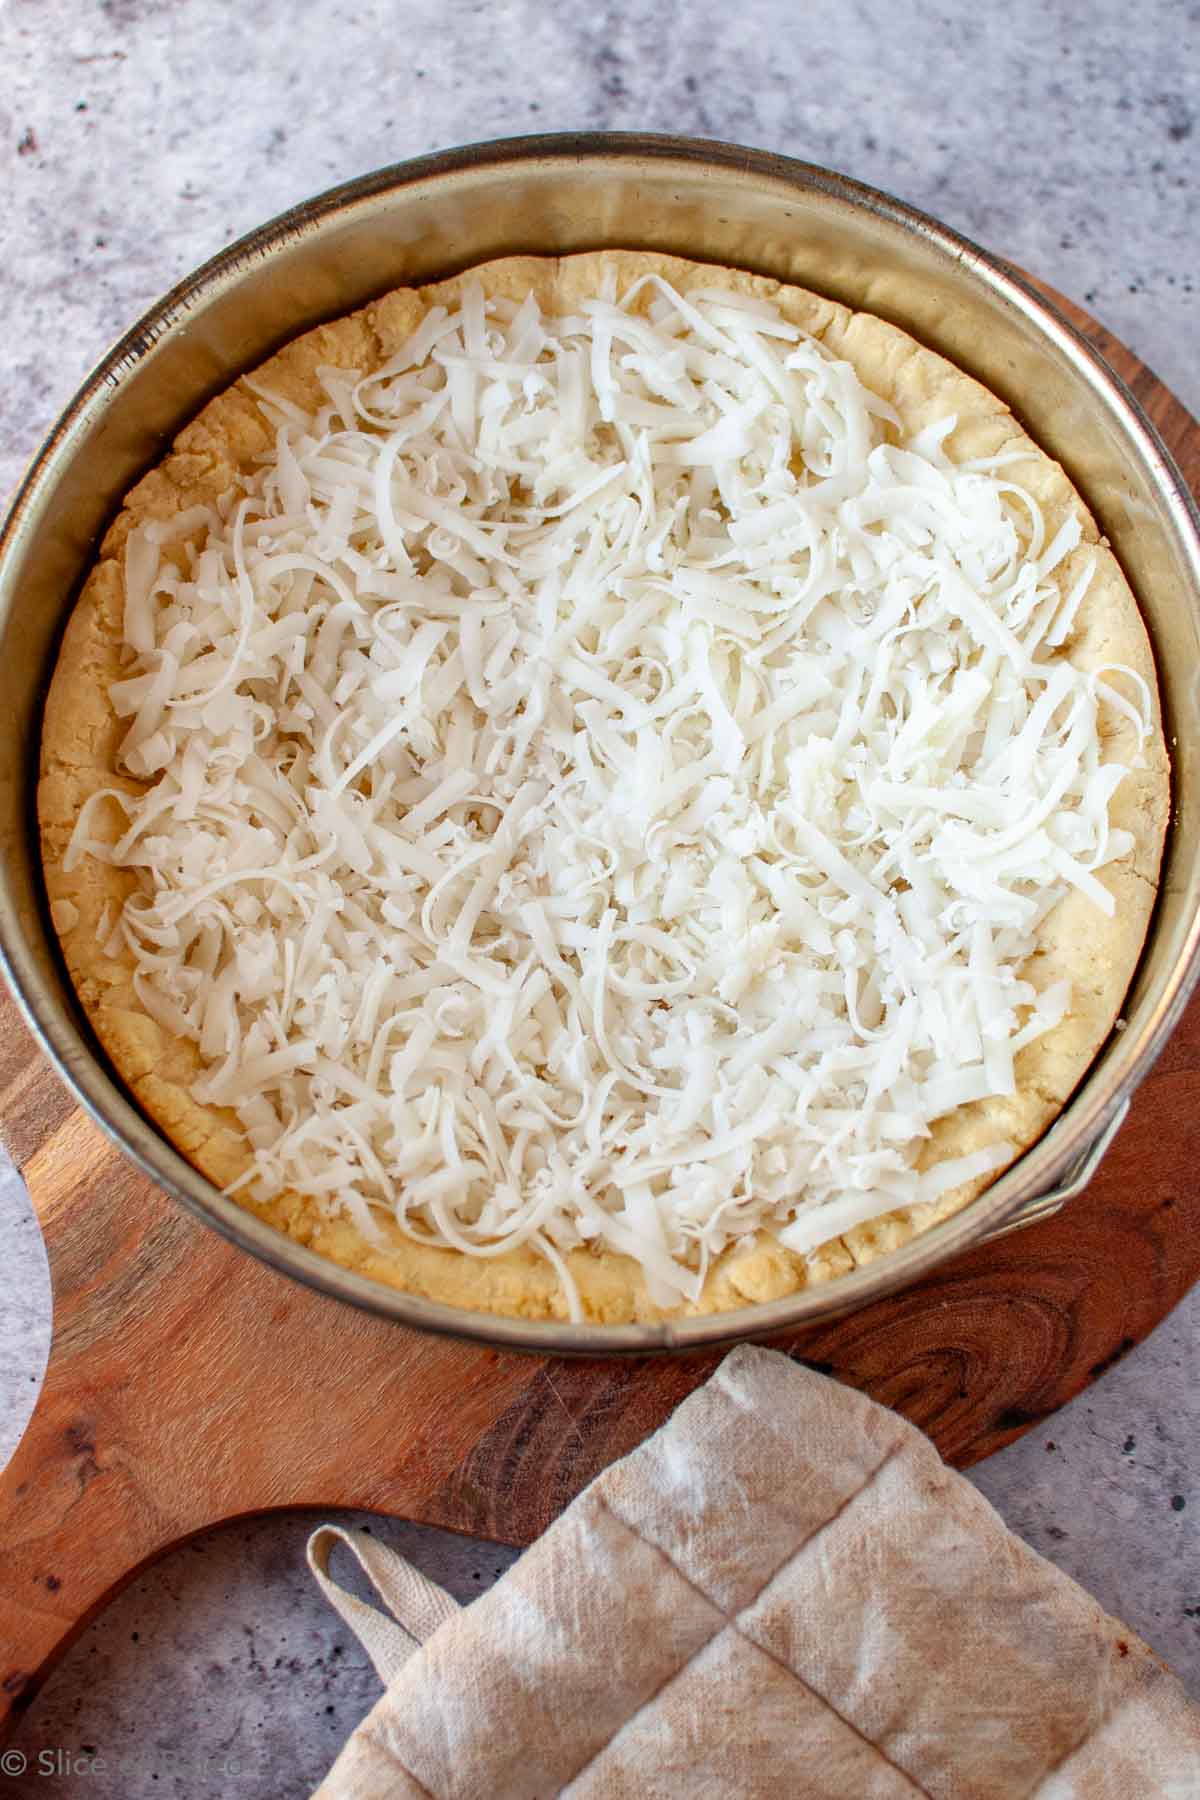 Paleo Chicago Style Deep Dish Pizza partially baked dough in a springform cake pan with shredded cheese on top.